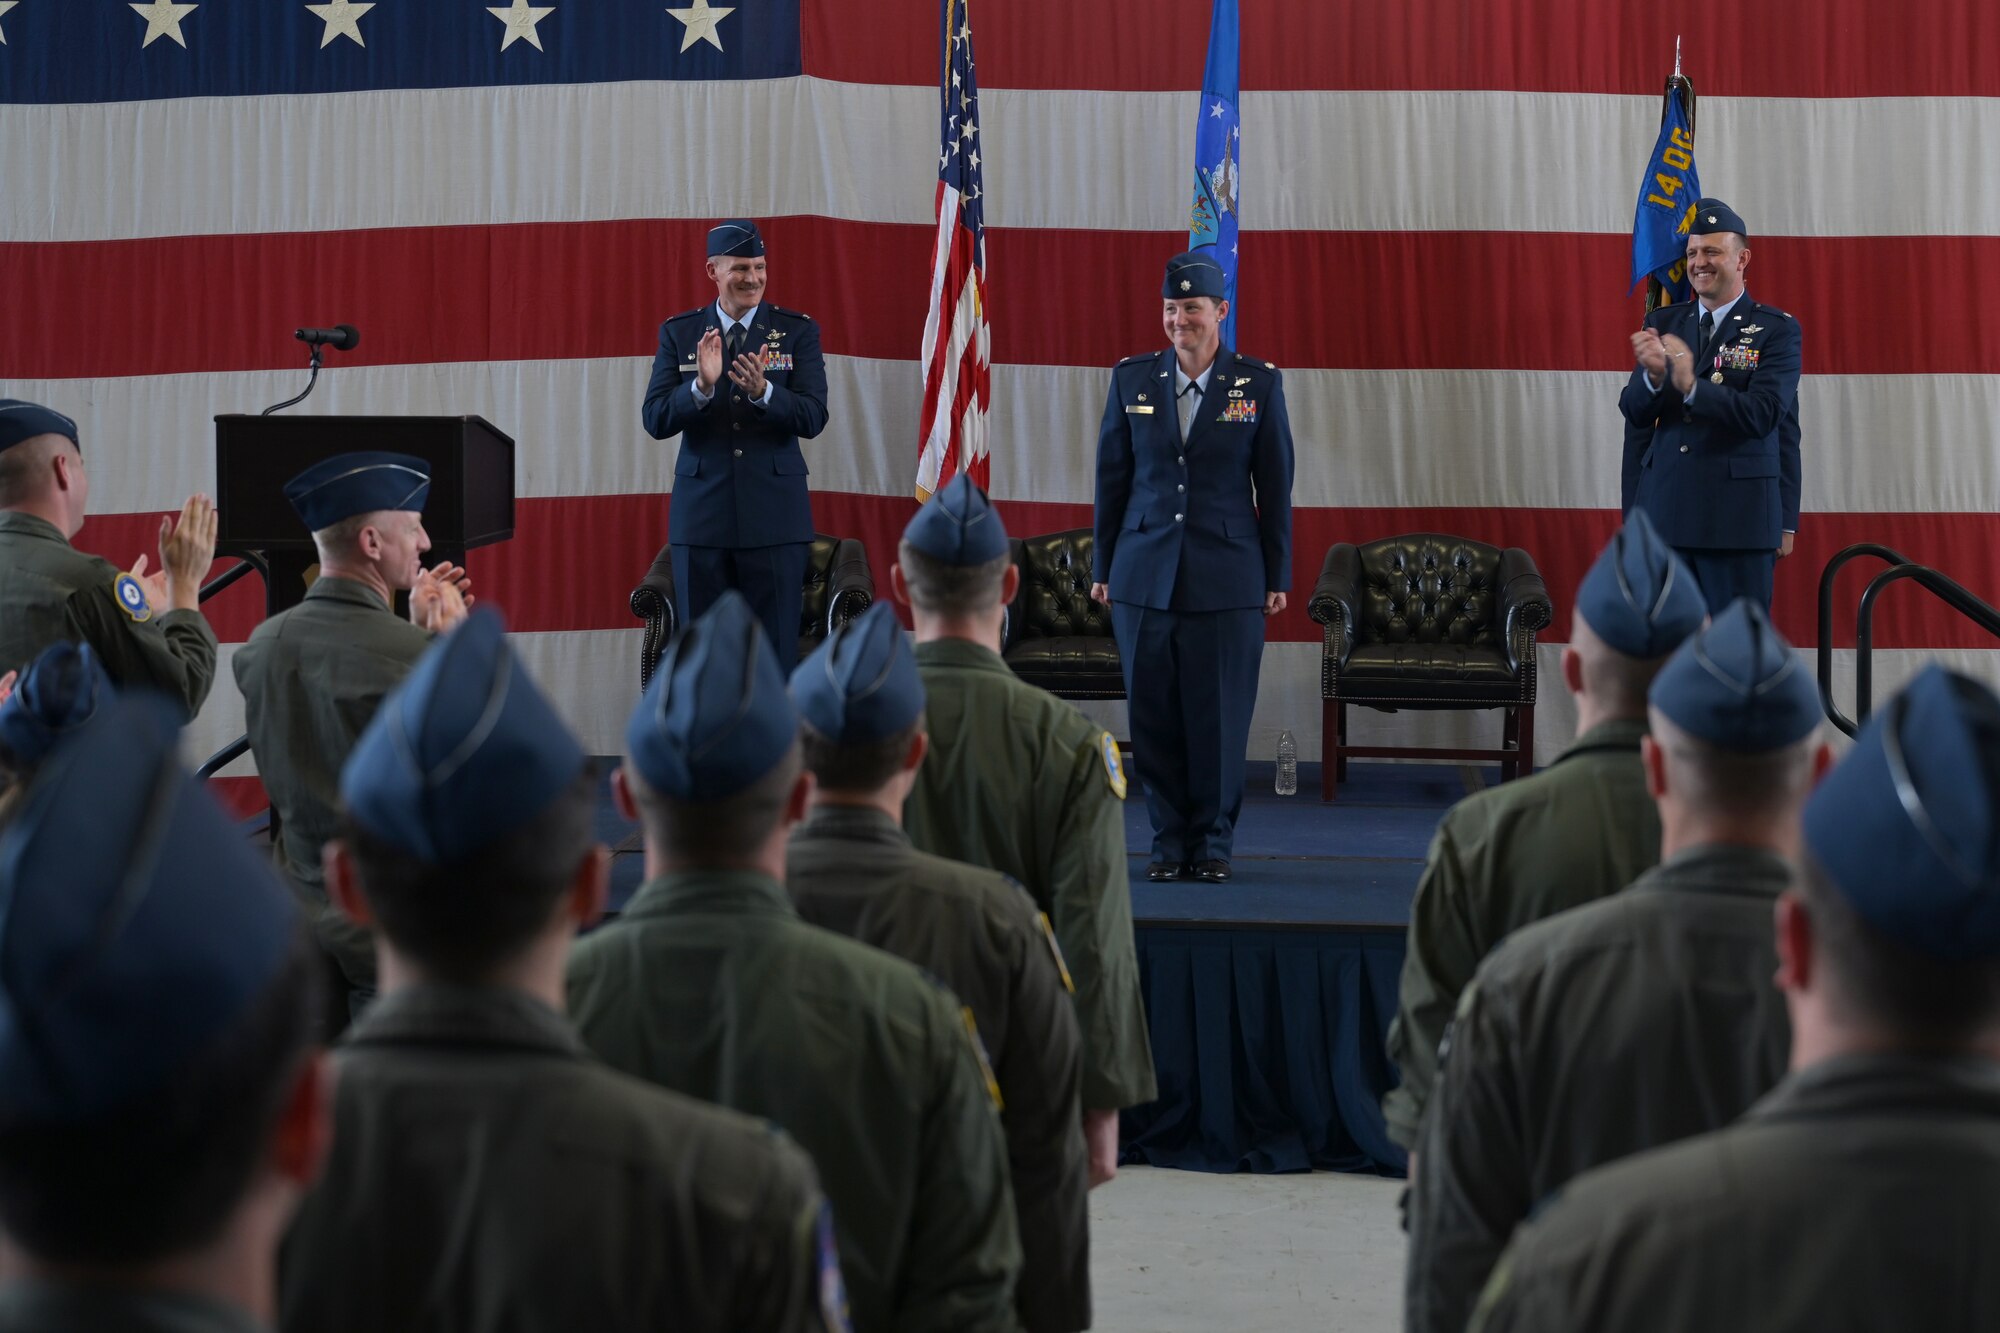 Audience members clap for Lt. Col. Valarie Ferrara, 37th Flying Training Squadron commander, at the 37th FTS change of command ceremony May 27, 2021, on Columbus Air Force Base, Miss. The 37th FTS conducts primary flight training in the T-6A Texan II where students learn basic aircraft characteristics and control, takeoff and landing techniques, aerobatics, and night, instrument and formation flying. (U.S. Air Force photo by Senior Airman Jake Jacobsen)